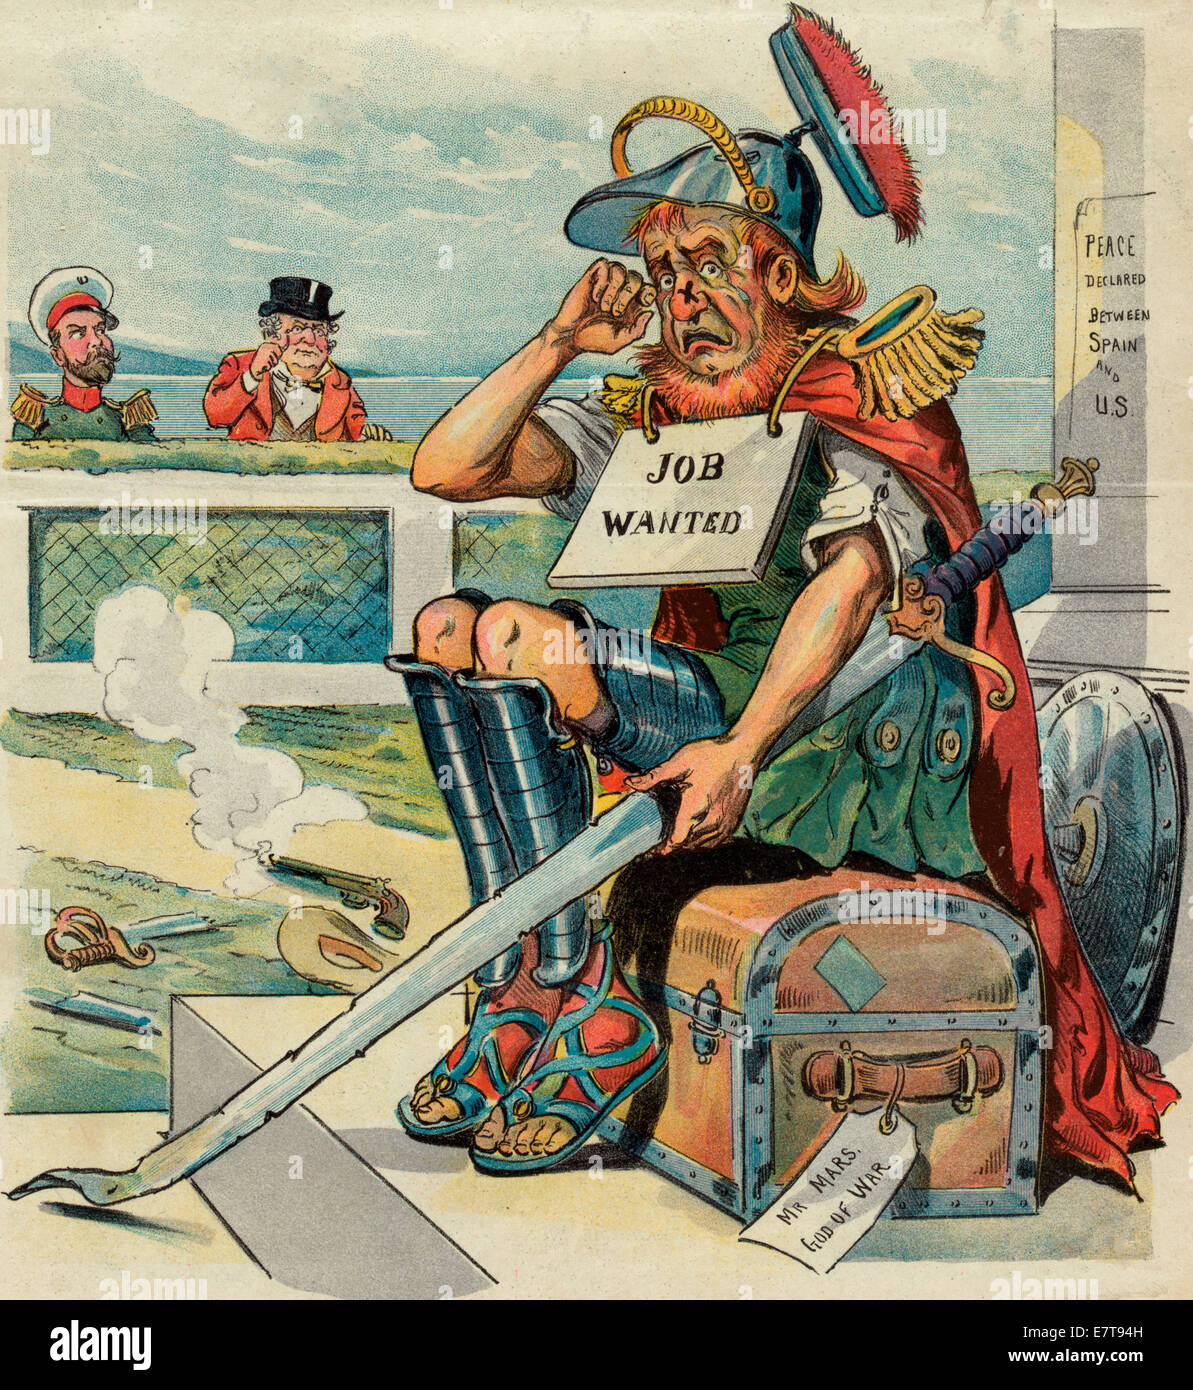 A disappointed God - He cries for more.  Mars, the Roman god of war, bruised and holding a battered and bent sword, and wearing a sign that states 'Job Wanted'; he is sitting on a trunk labeled 'Mr. Mars, God of War'. A notice posted on the wall behind him states 'Peace Declared Between Spain and U.S.' John Bull and another man, who may be Czar Nicholas II, are observing from behind a hedge on the left. Political Cartoon 1899 Stock Photo